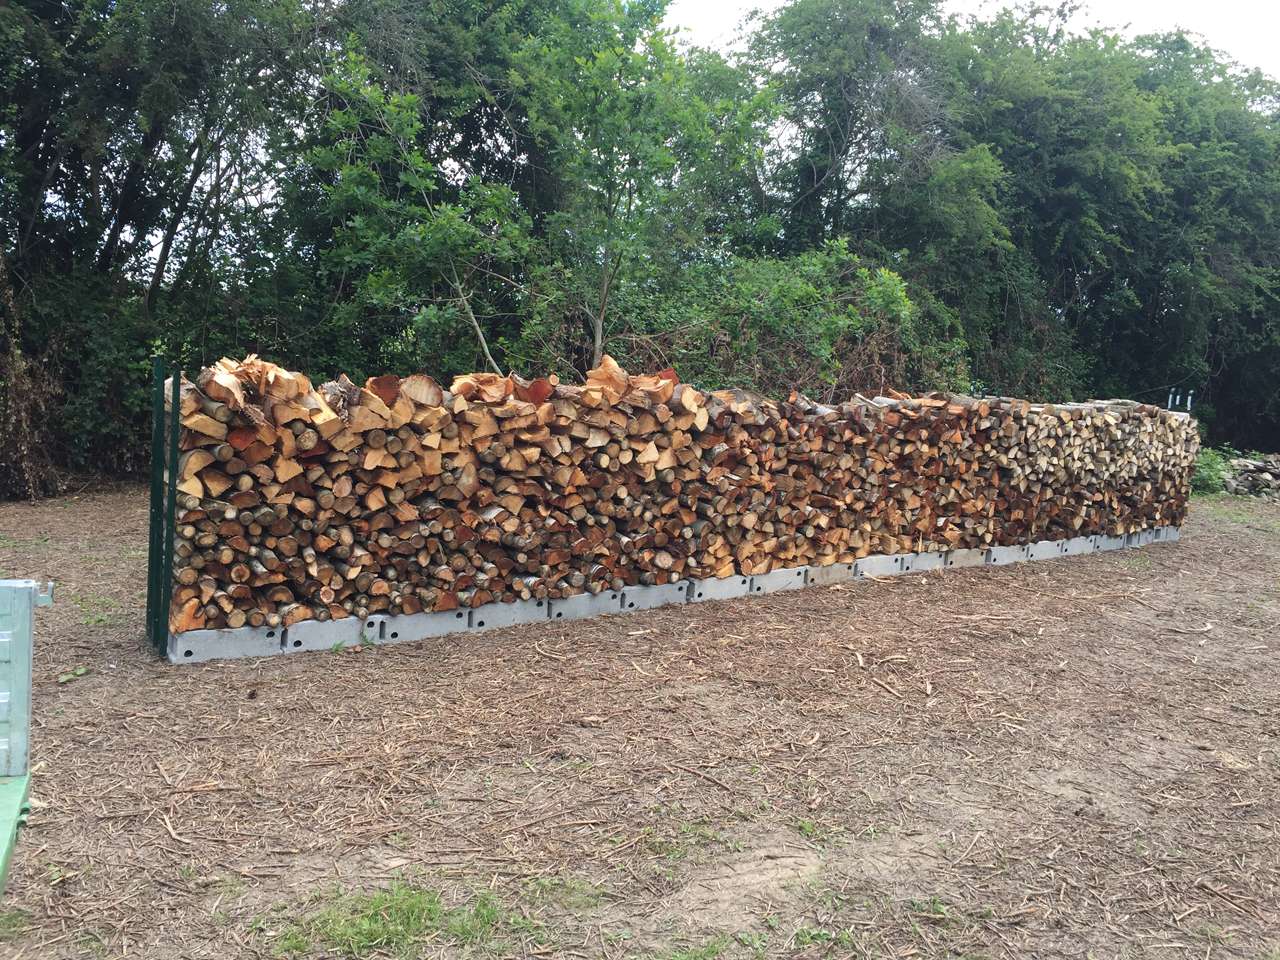 Seasoning firewood and storing firewood -the first years stack